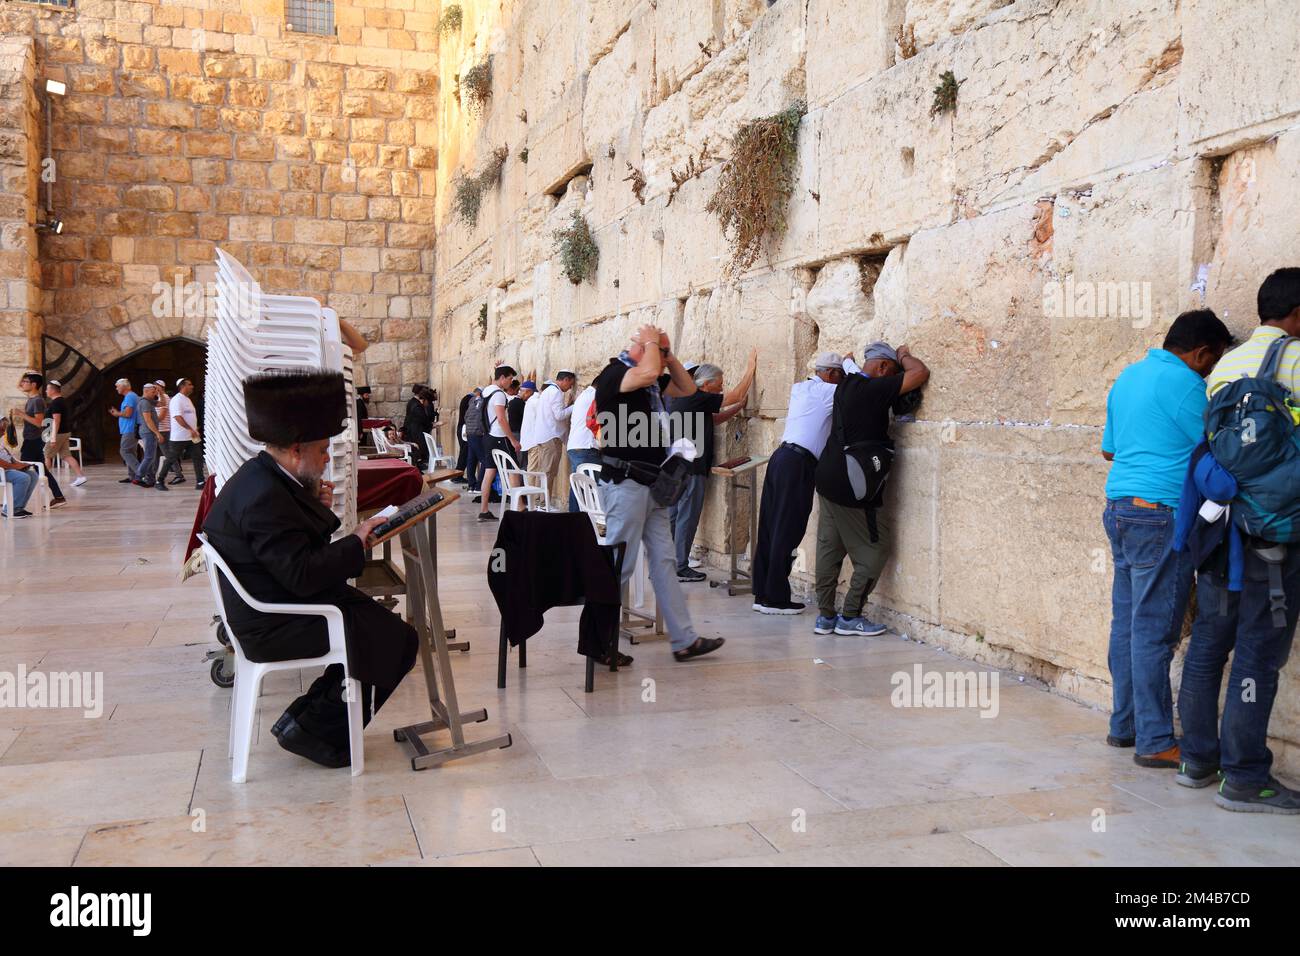 JERUSALEM, ISRAEL - OCTOBER 28, 2022: People visit the Western Wall (or Wailing Wall) in Jerusalem Old City. It is part of Jerusalem's UNESCO World He Stock Photo